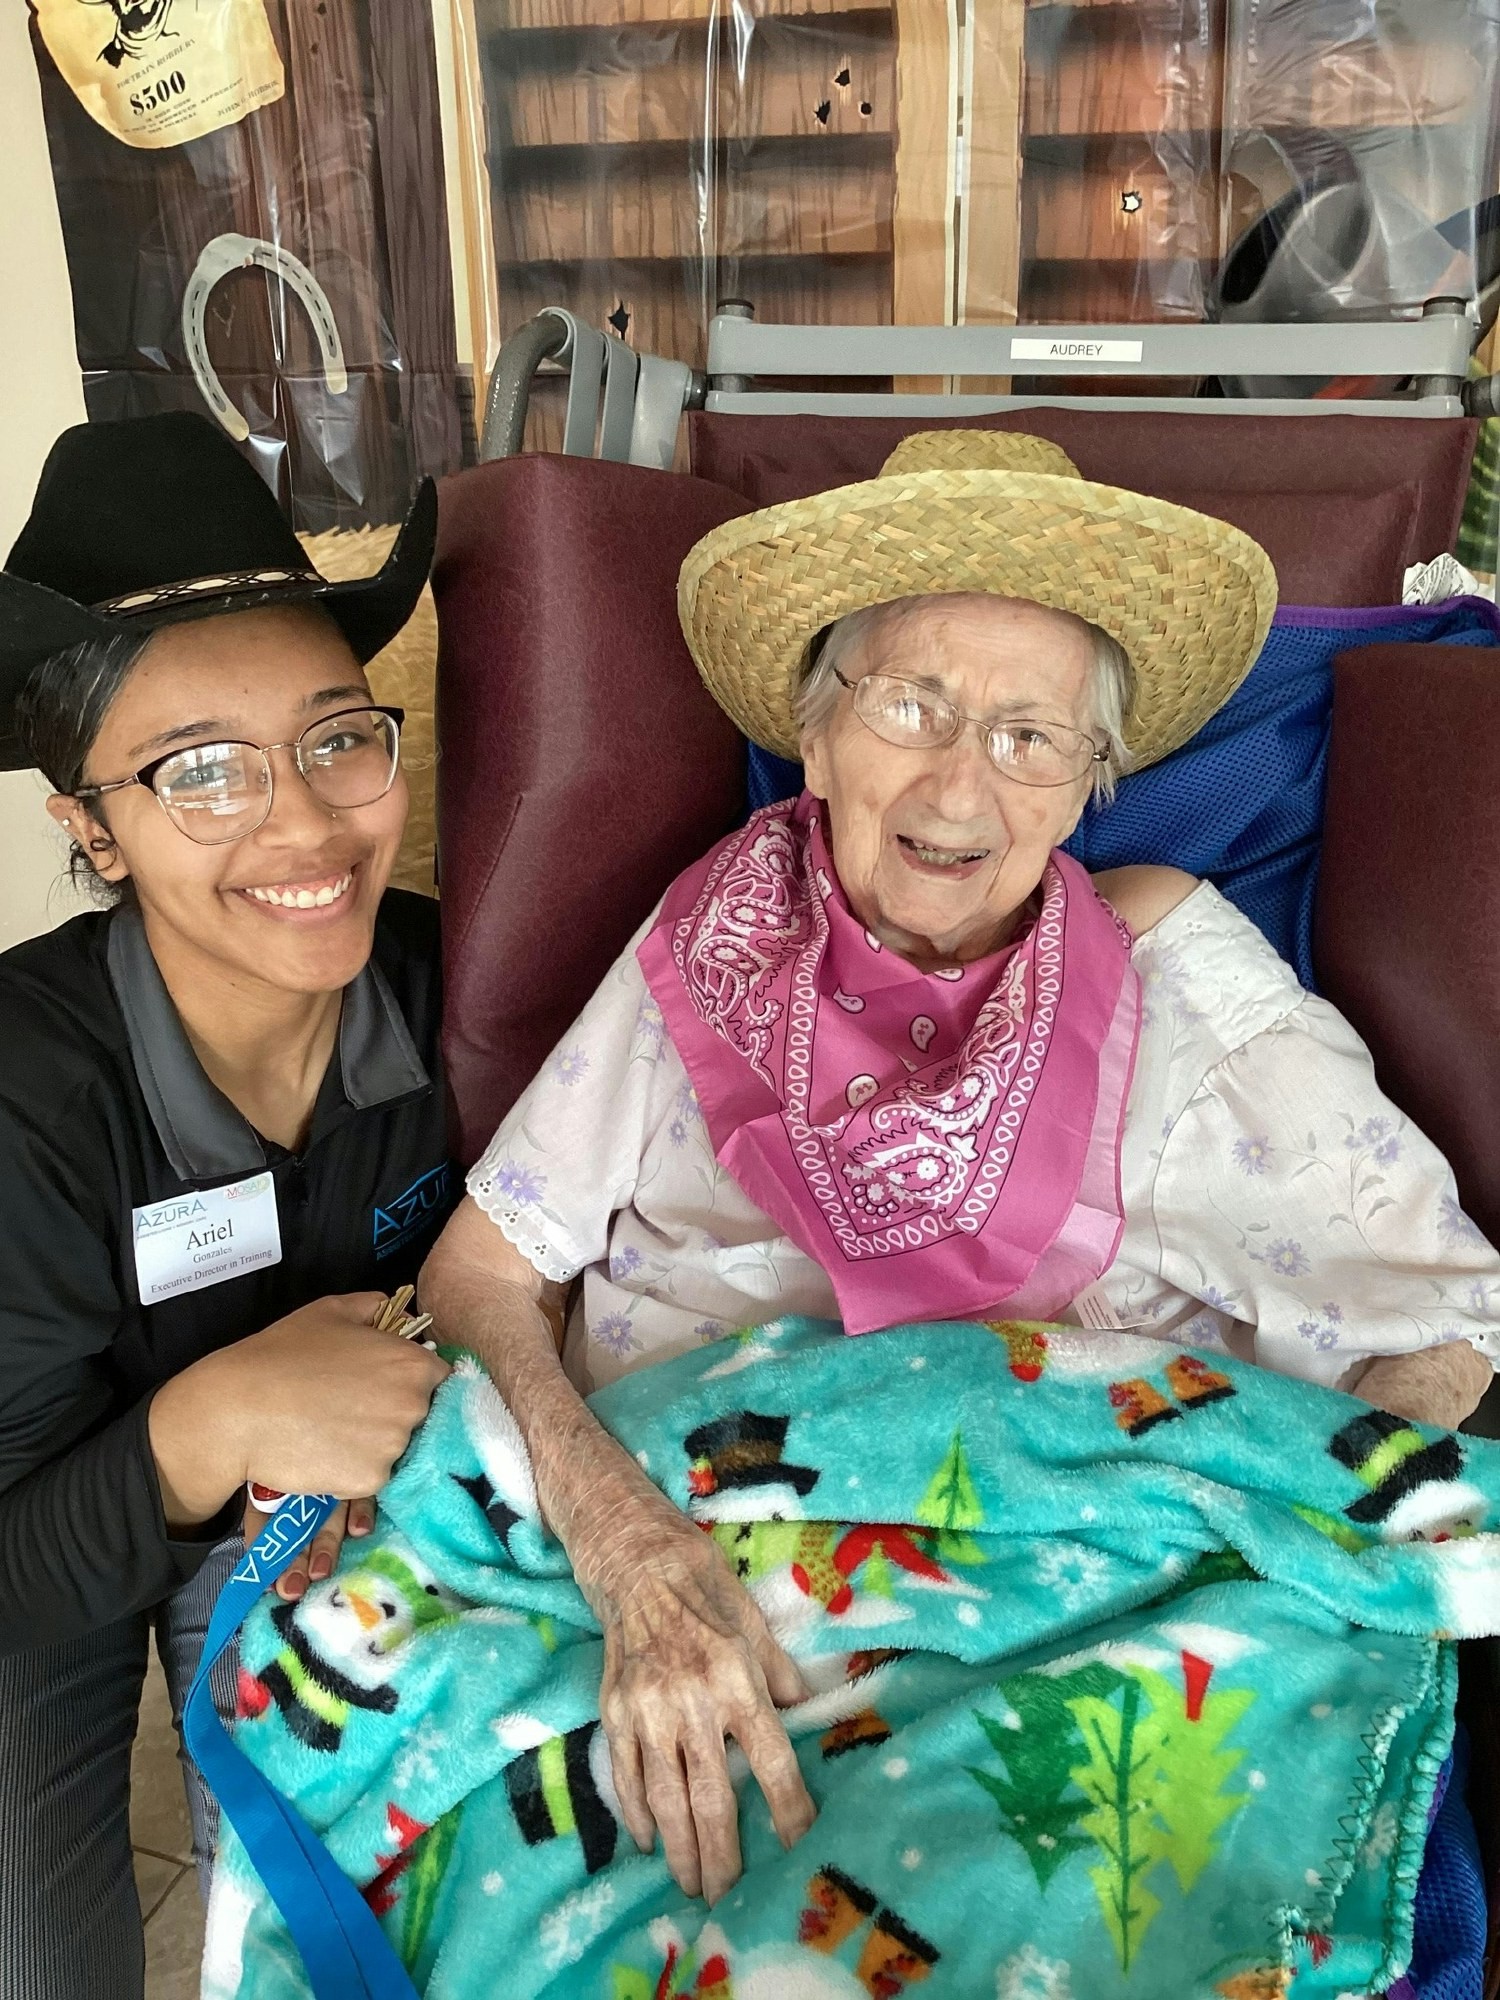 It was western day at Azura and our team and residents loved dressing to impress in their western attire!